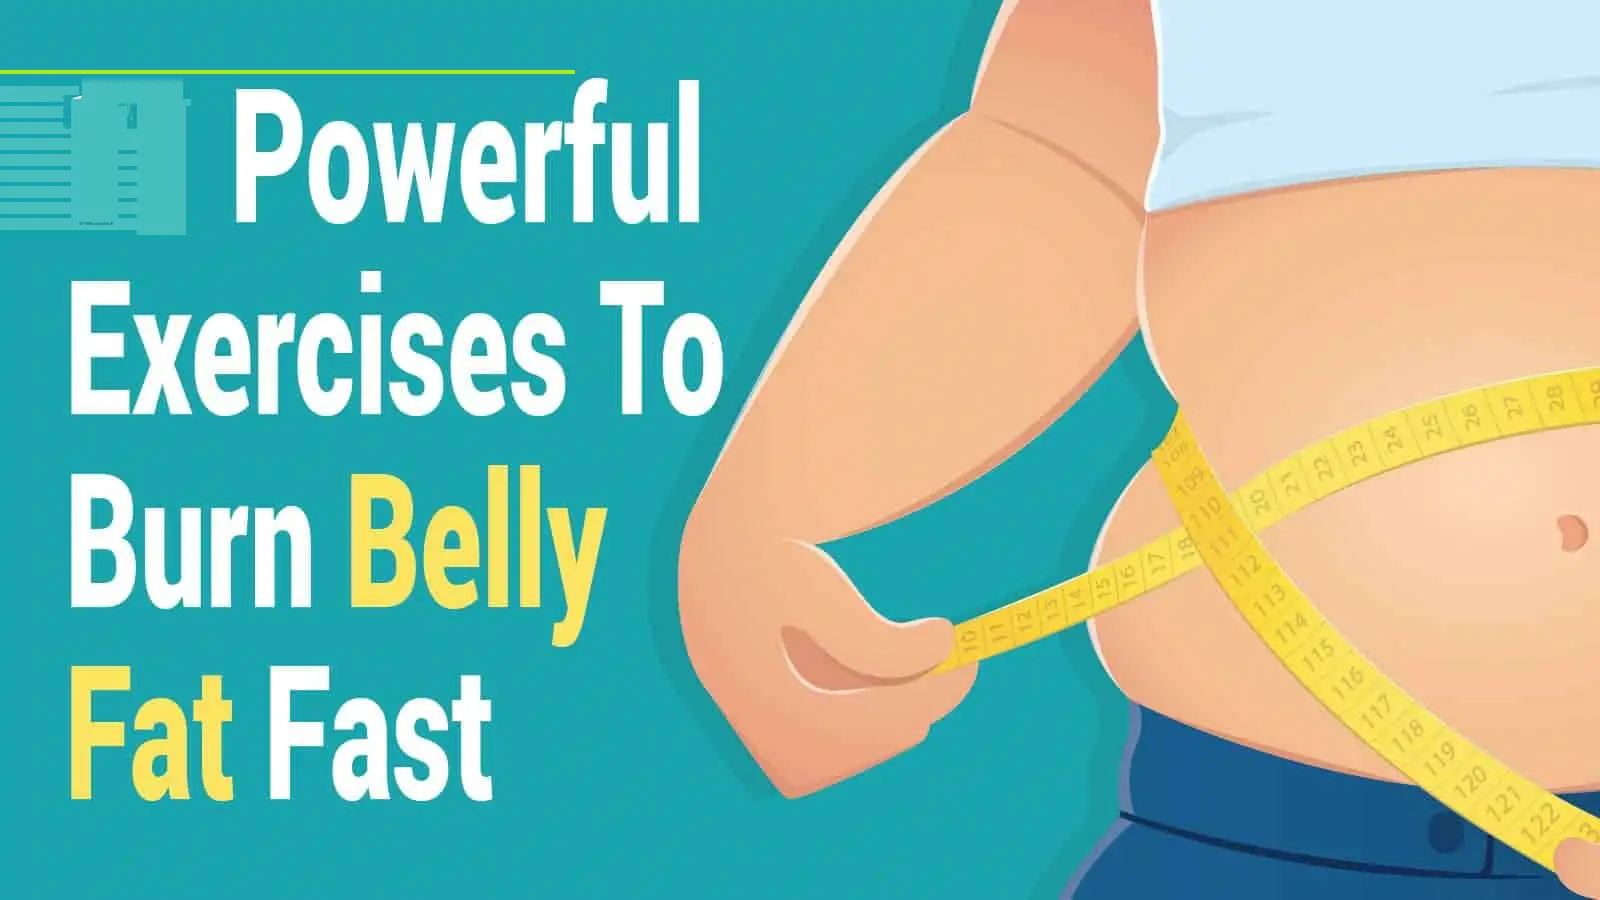 What is the best exercise to lose belly fat